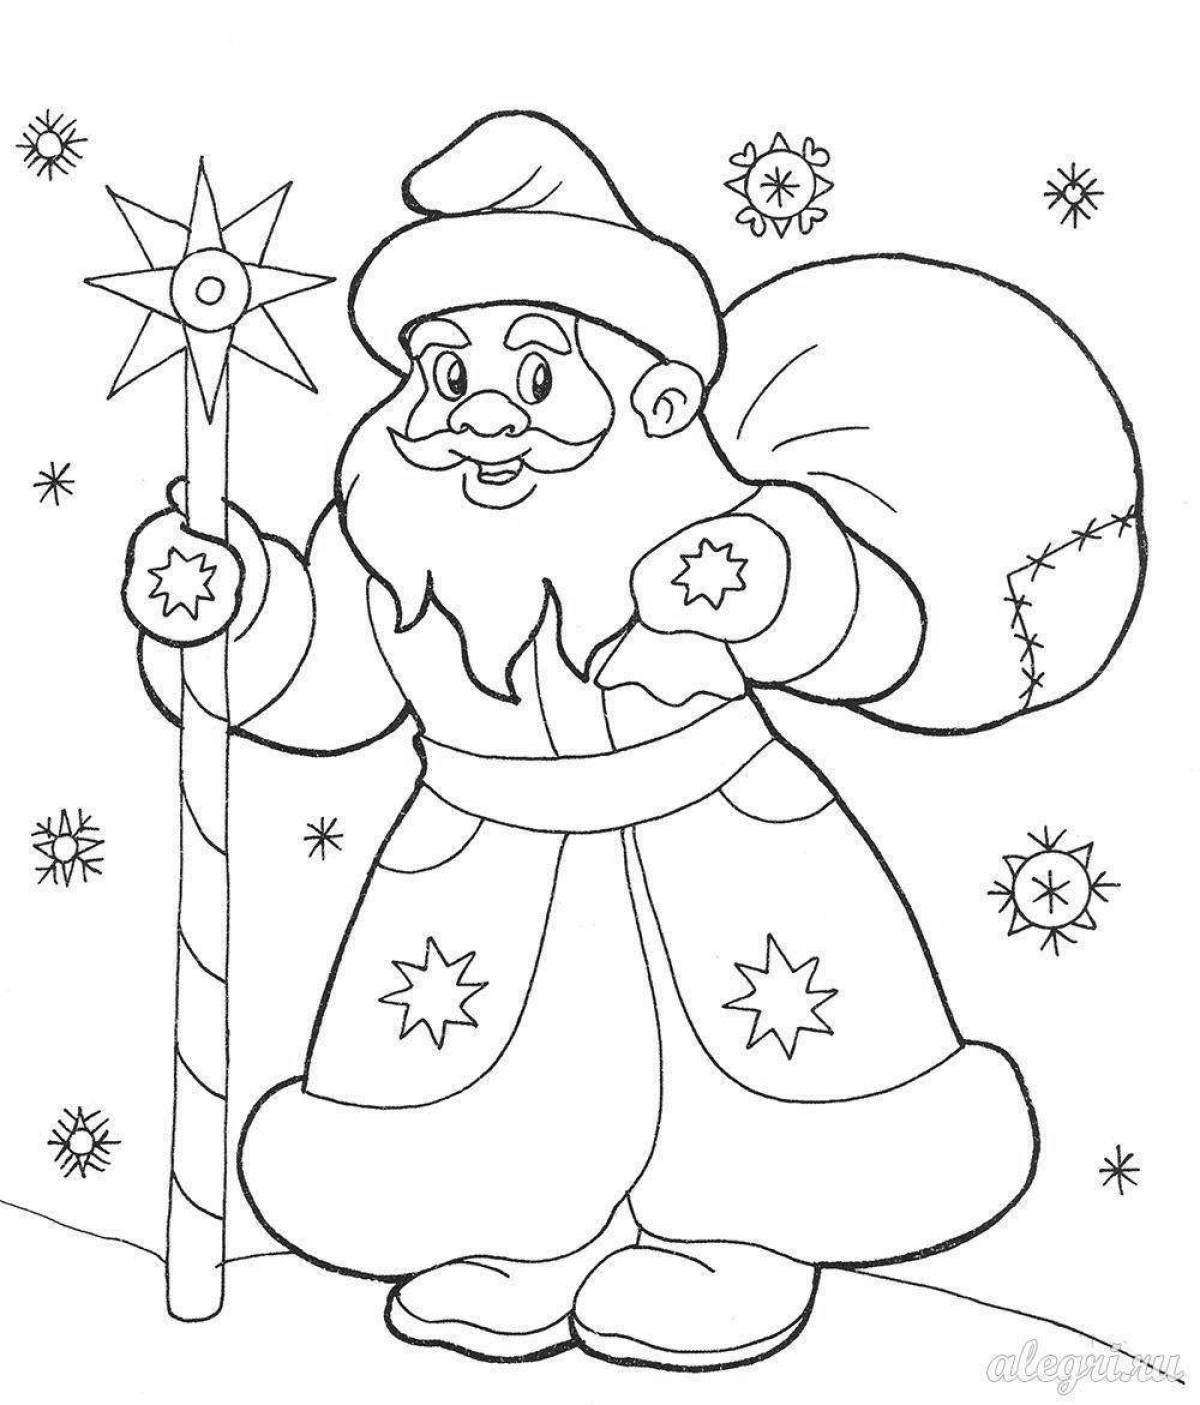 Outstanding santa claus coloring book for kids